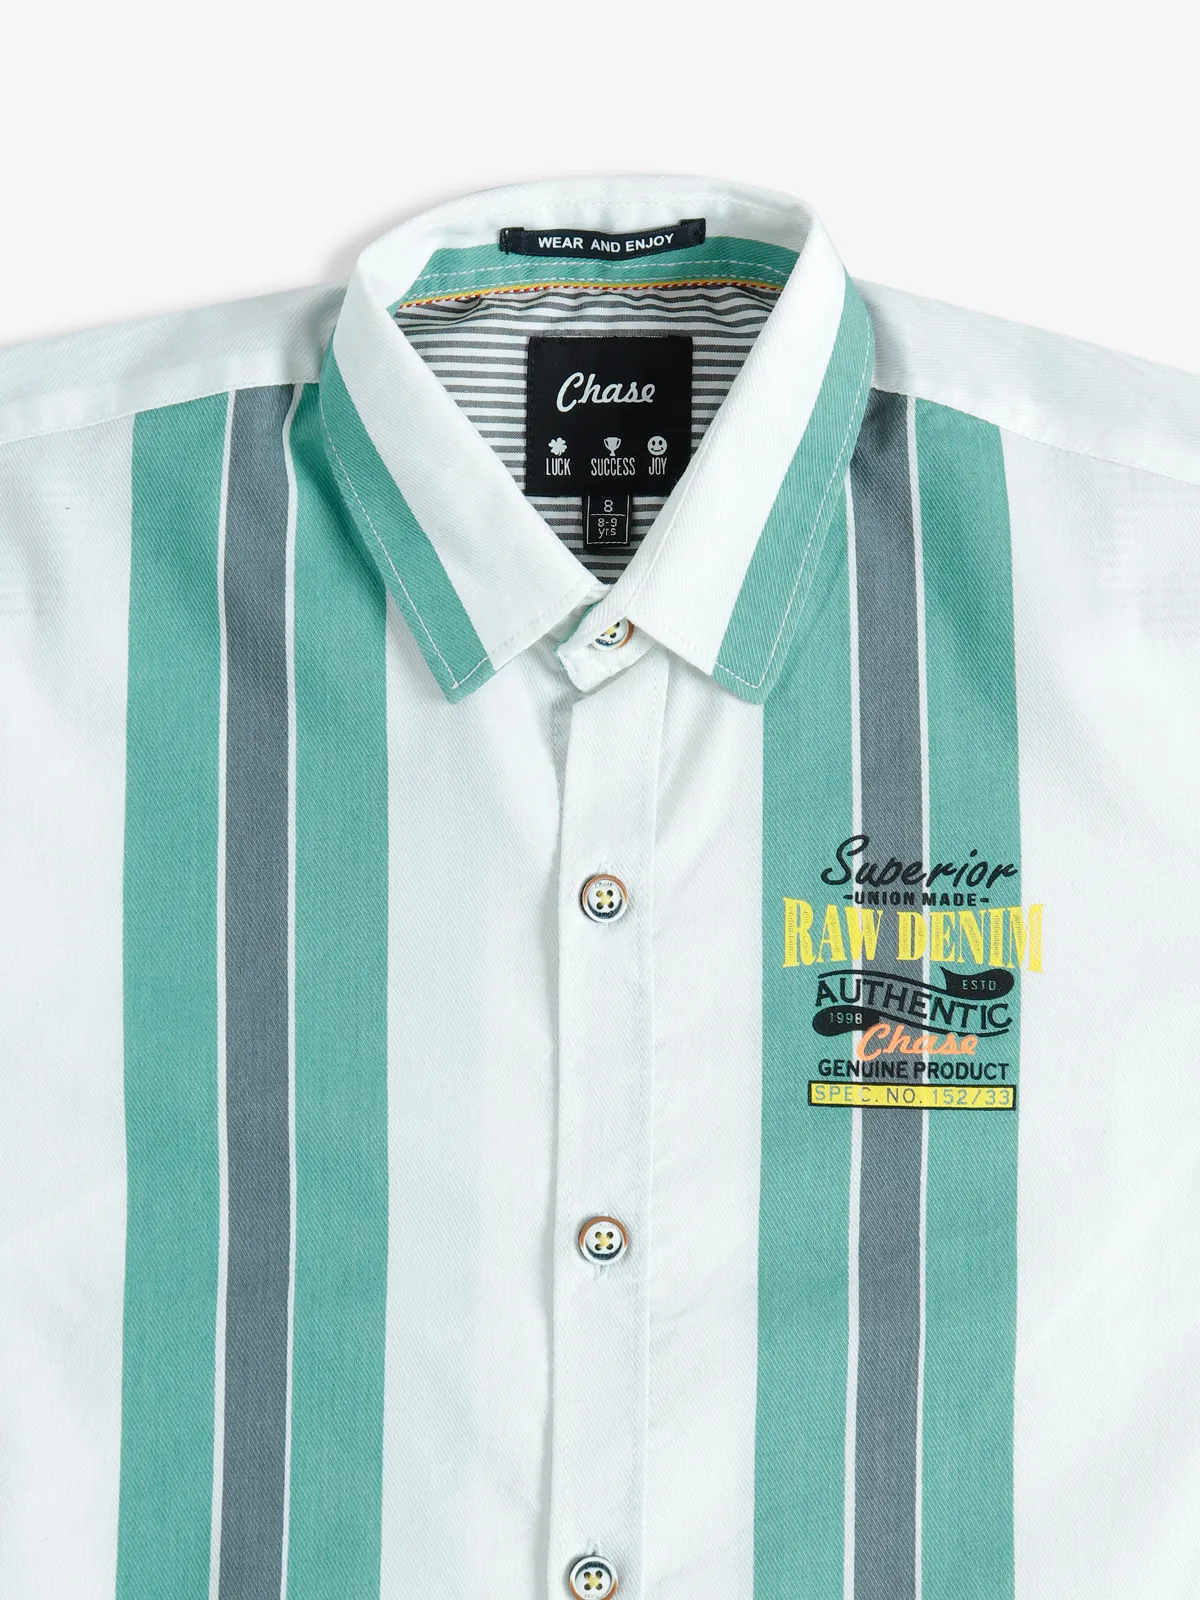 Chase green and white stripe shirt